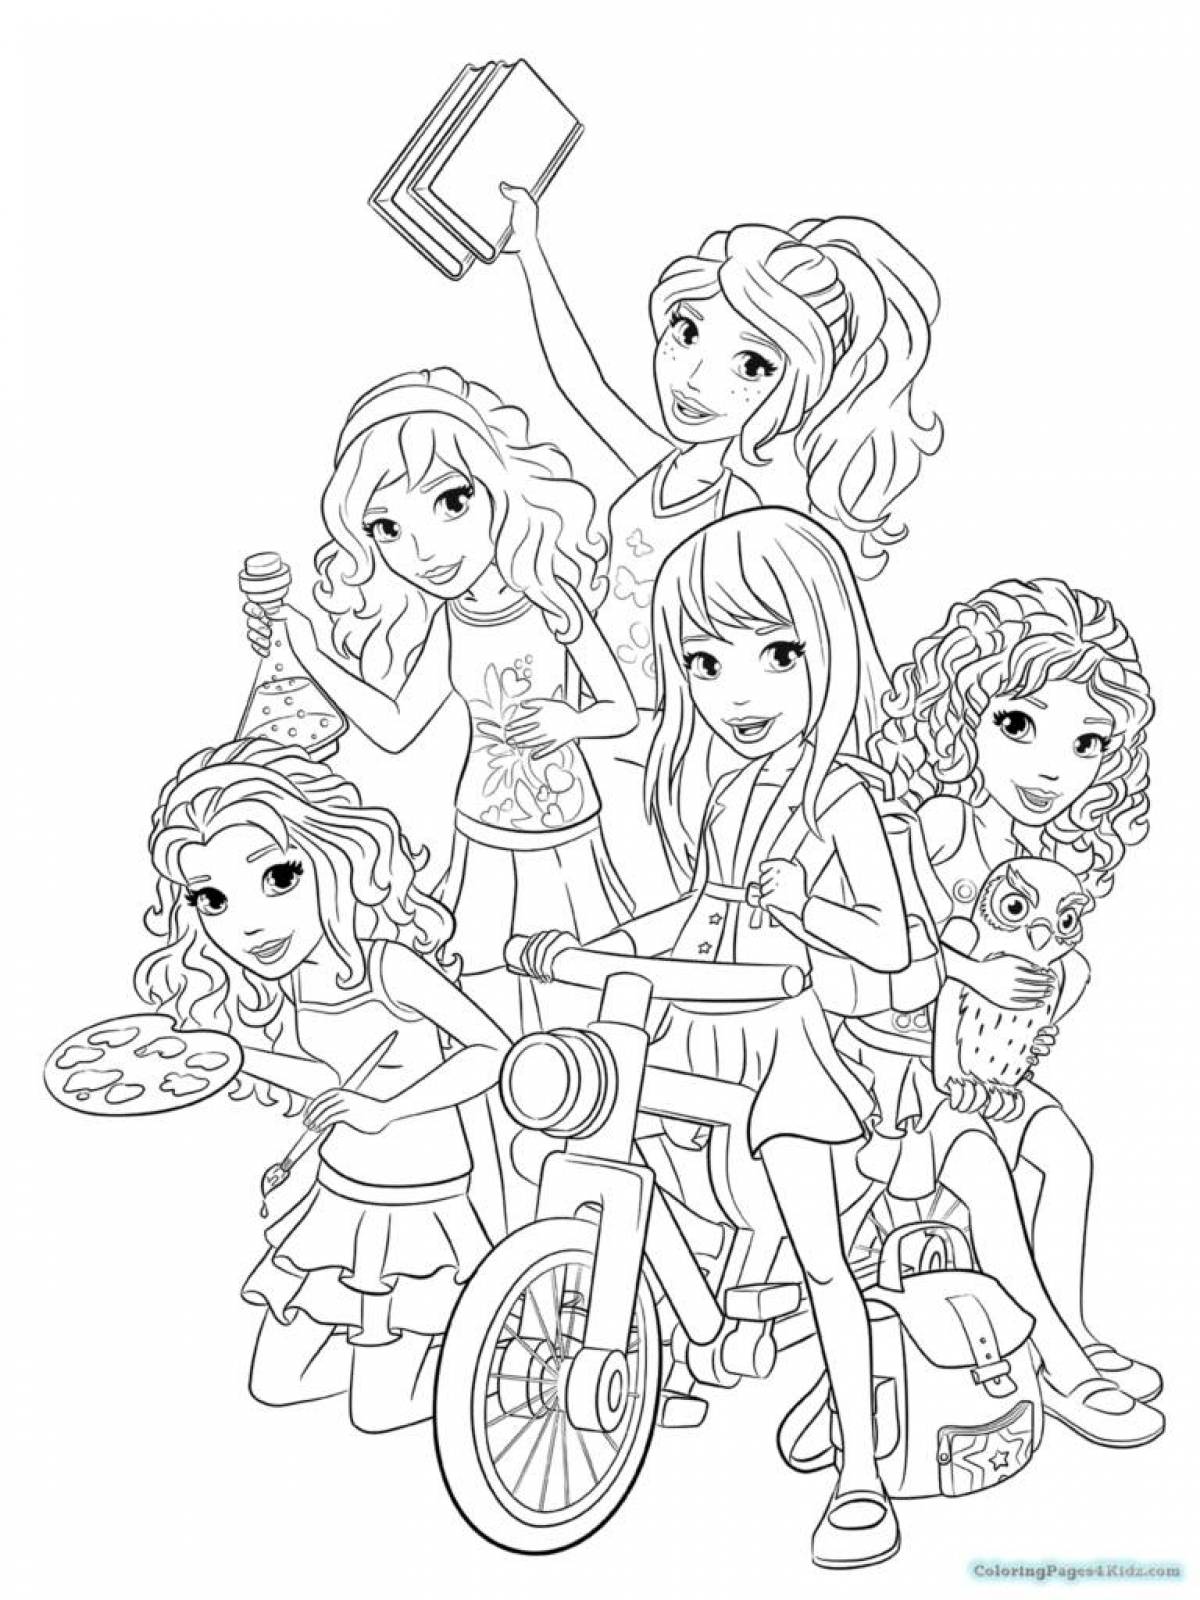 Outrageous girly coloring book